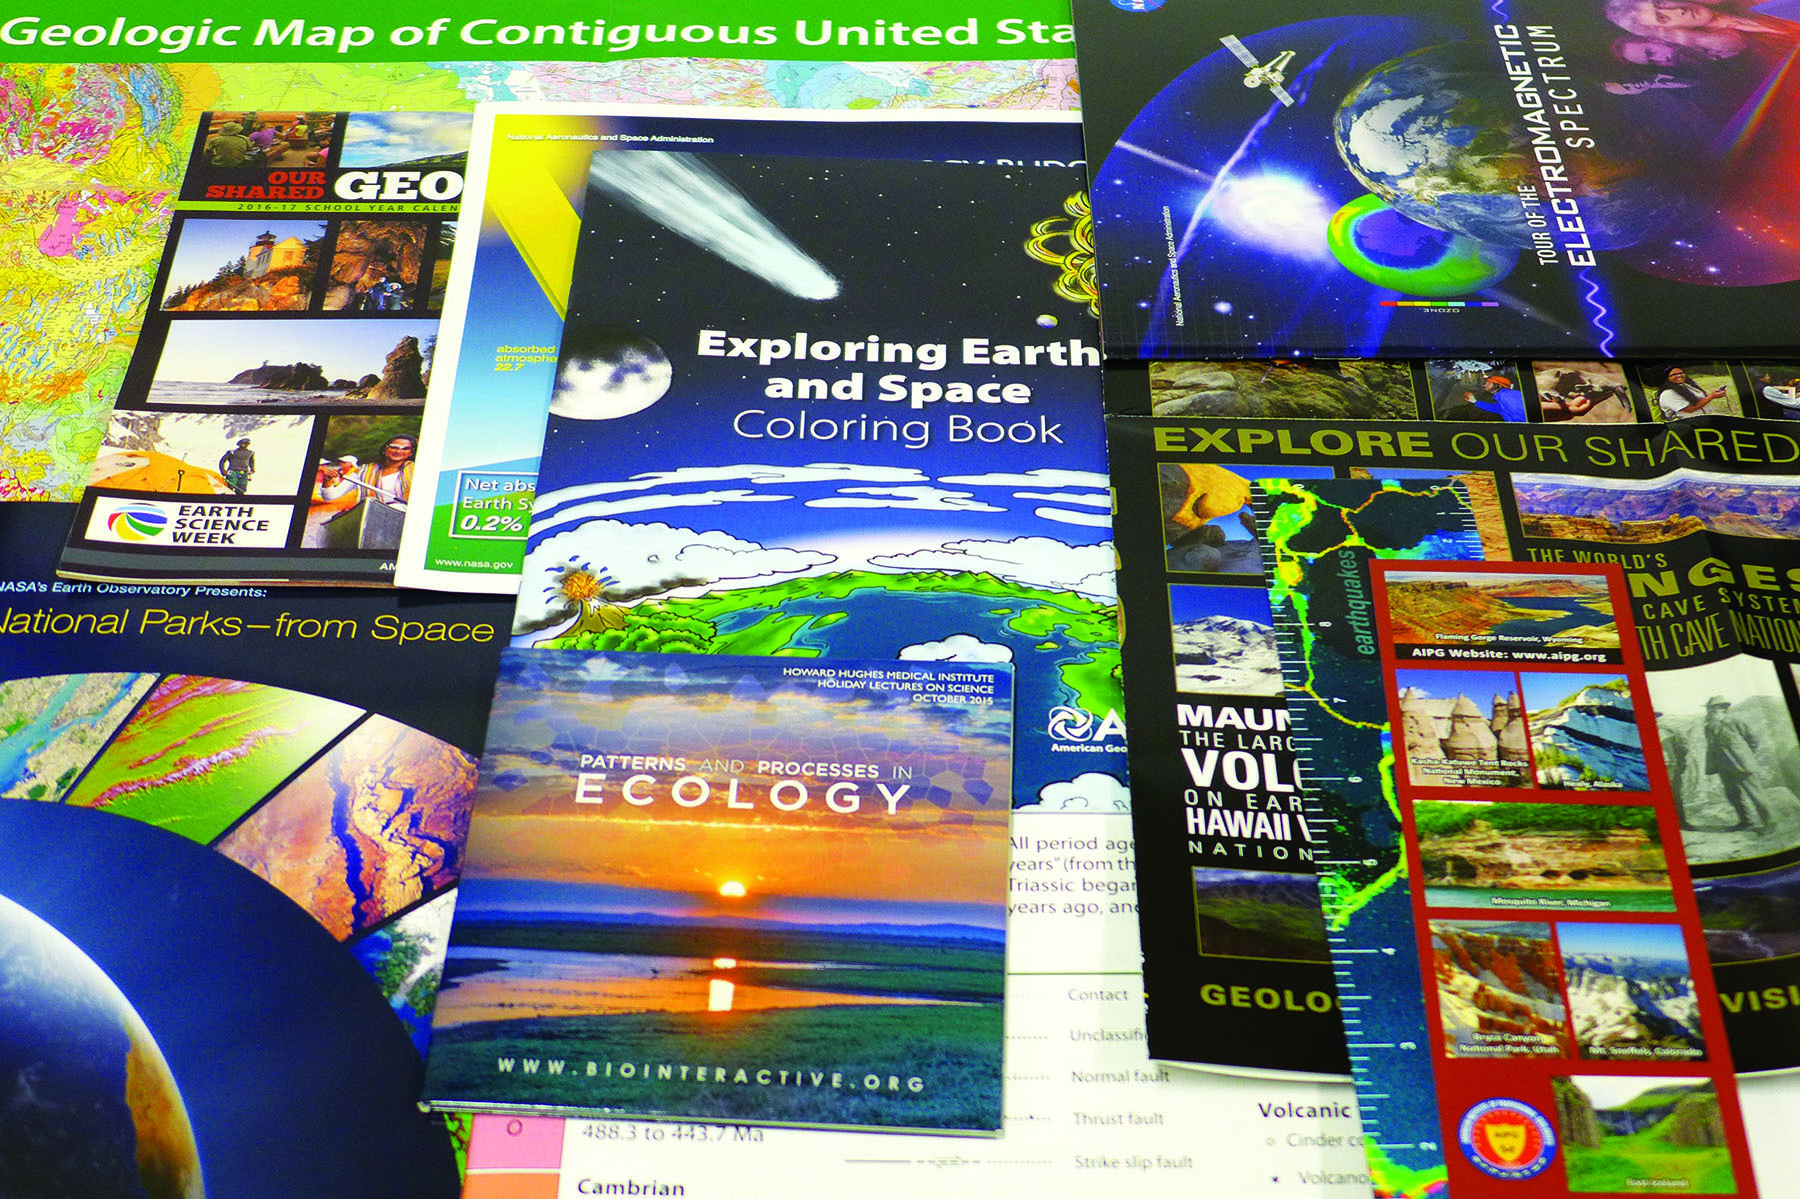 Toolkits are available now for Earth Science Week Oct. 9-15. 